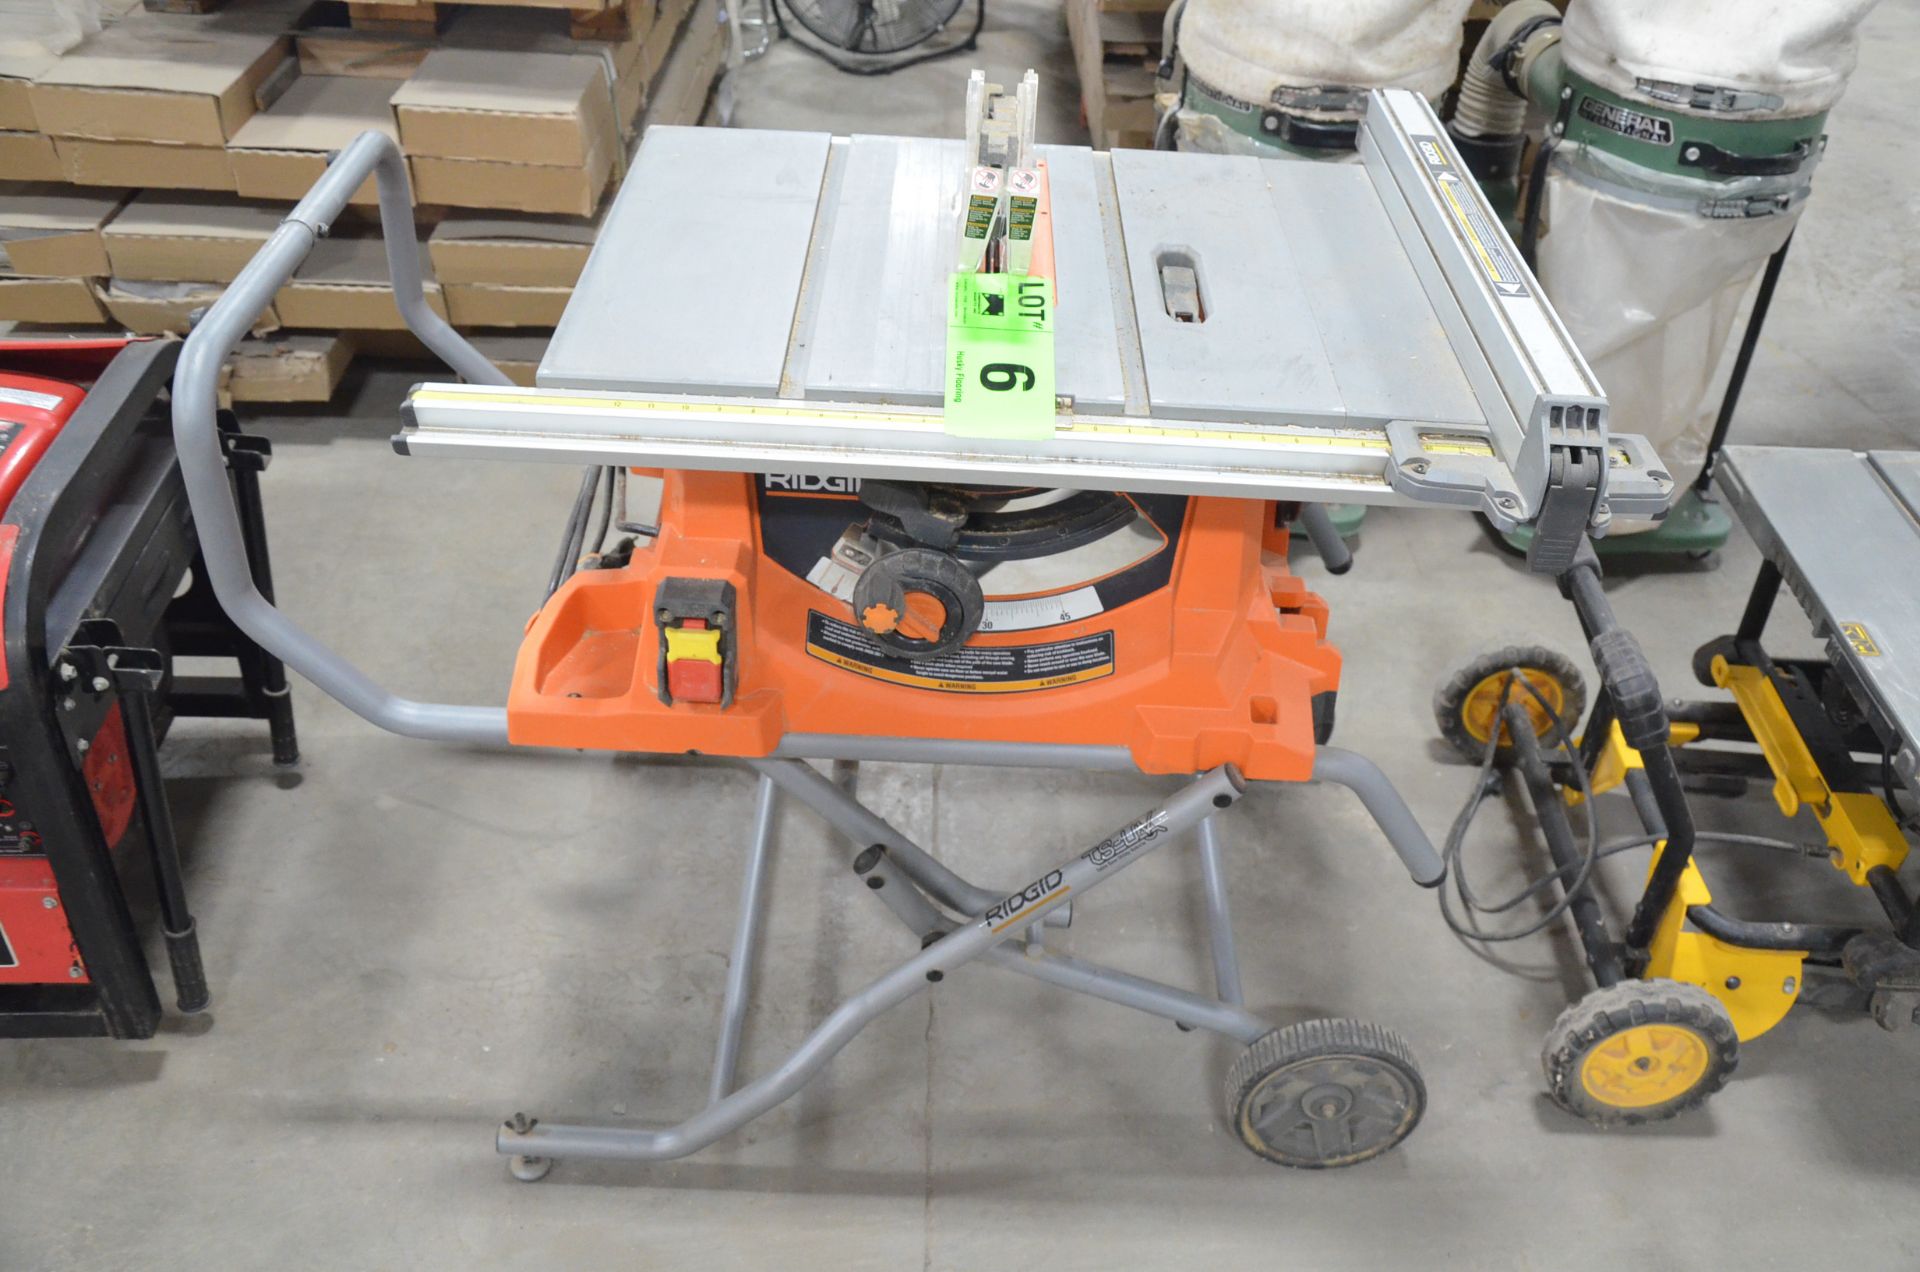 RIDGID R4513 10" PORTABLE TABLE SAW WITH STAND, S/N GW17384DC07546